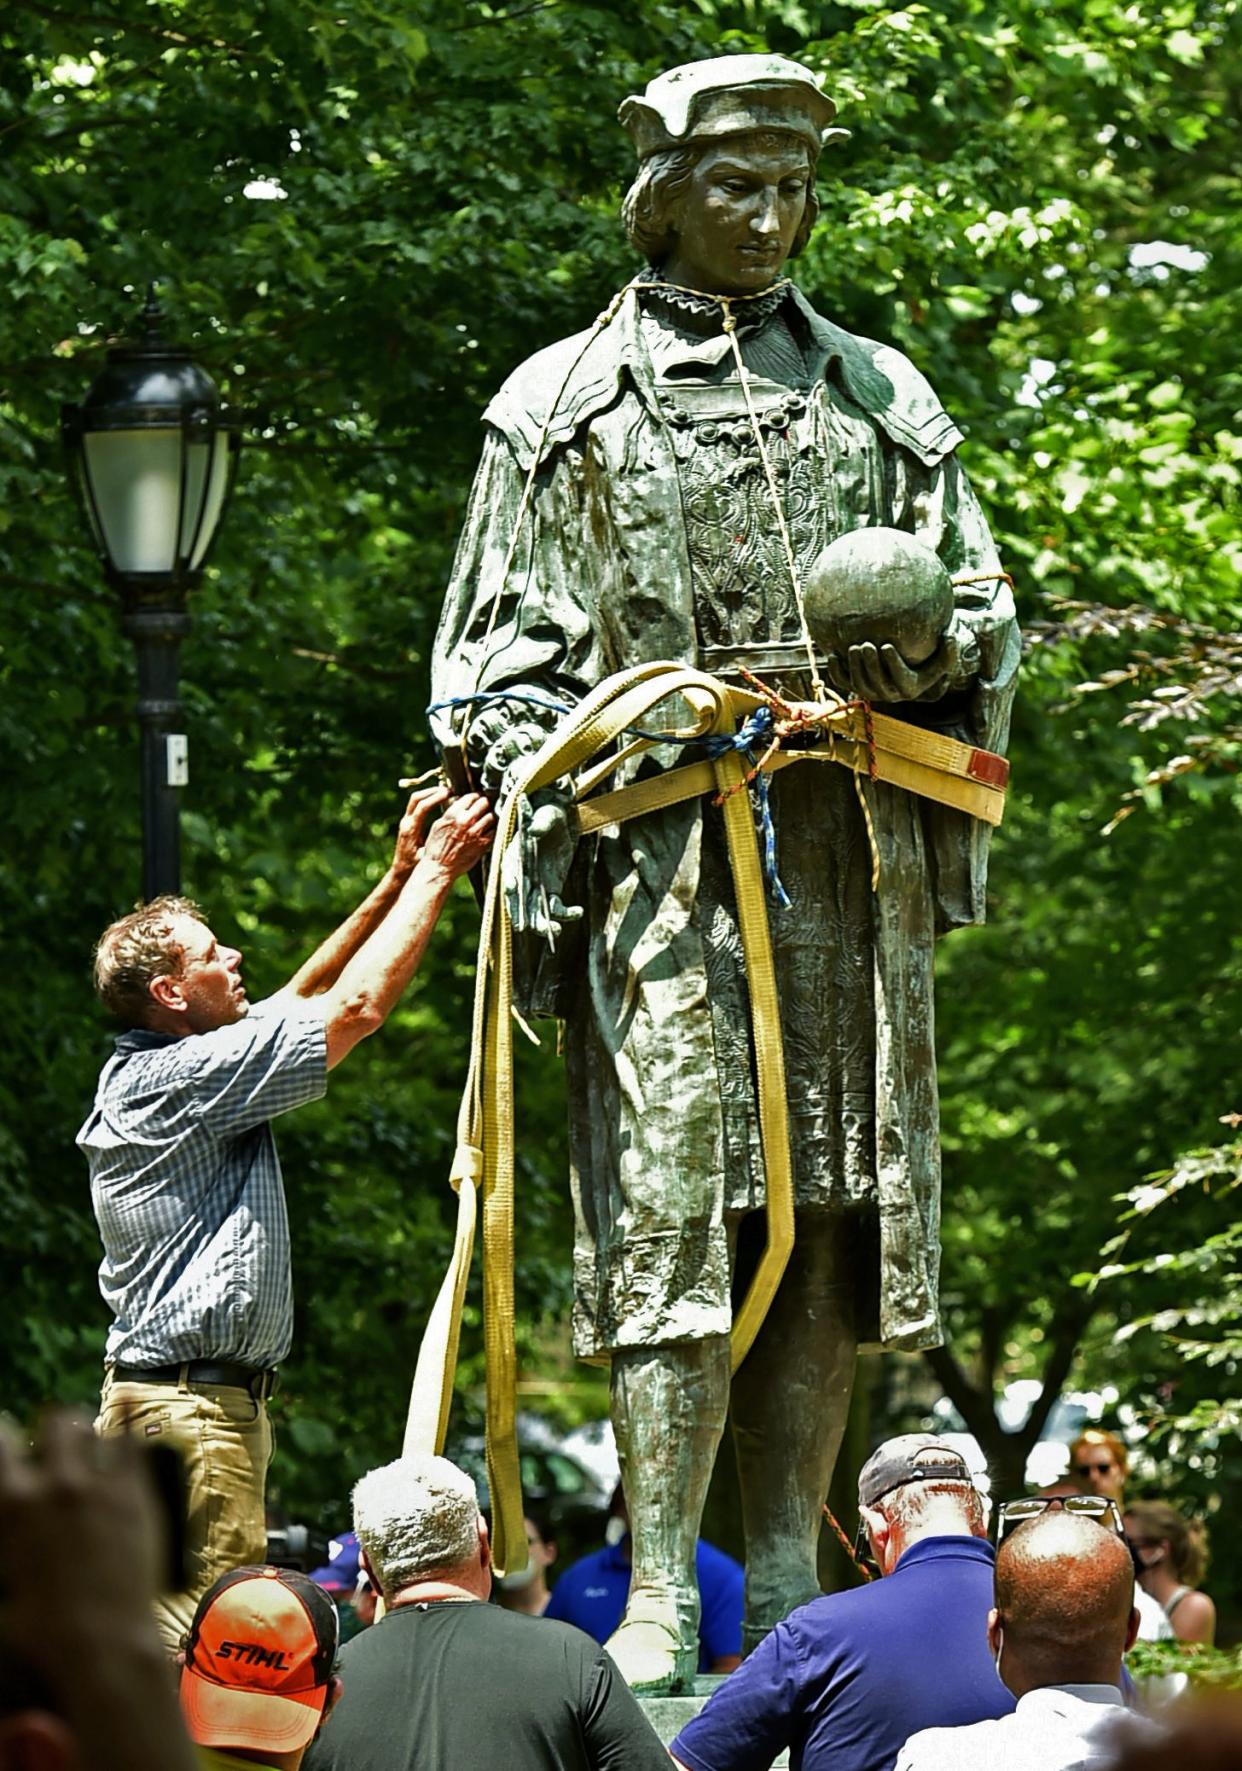 A statue of Christopher Columbus is removed from Wooster Square Park in New Haven, Conn. on Wednesday, June 24, 2020.